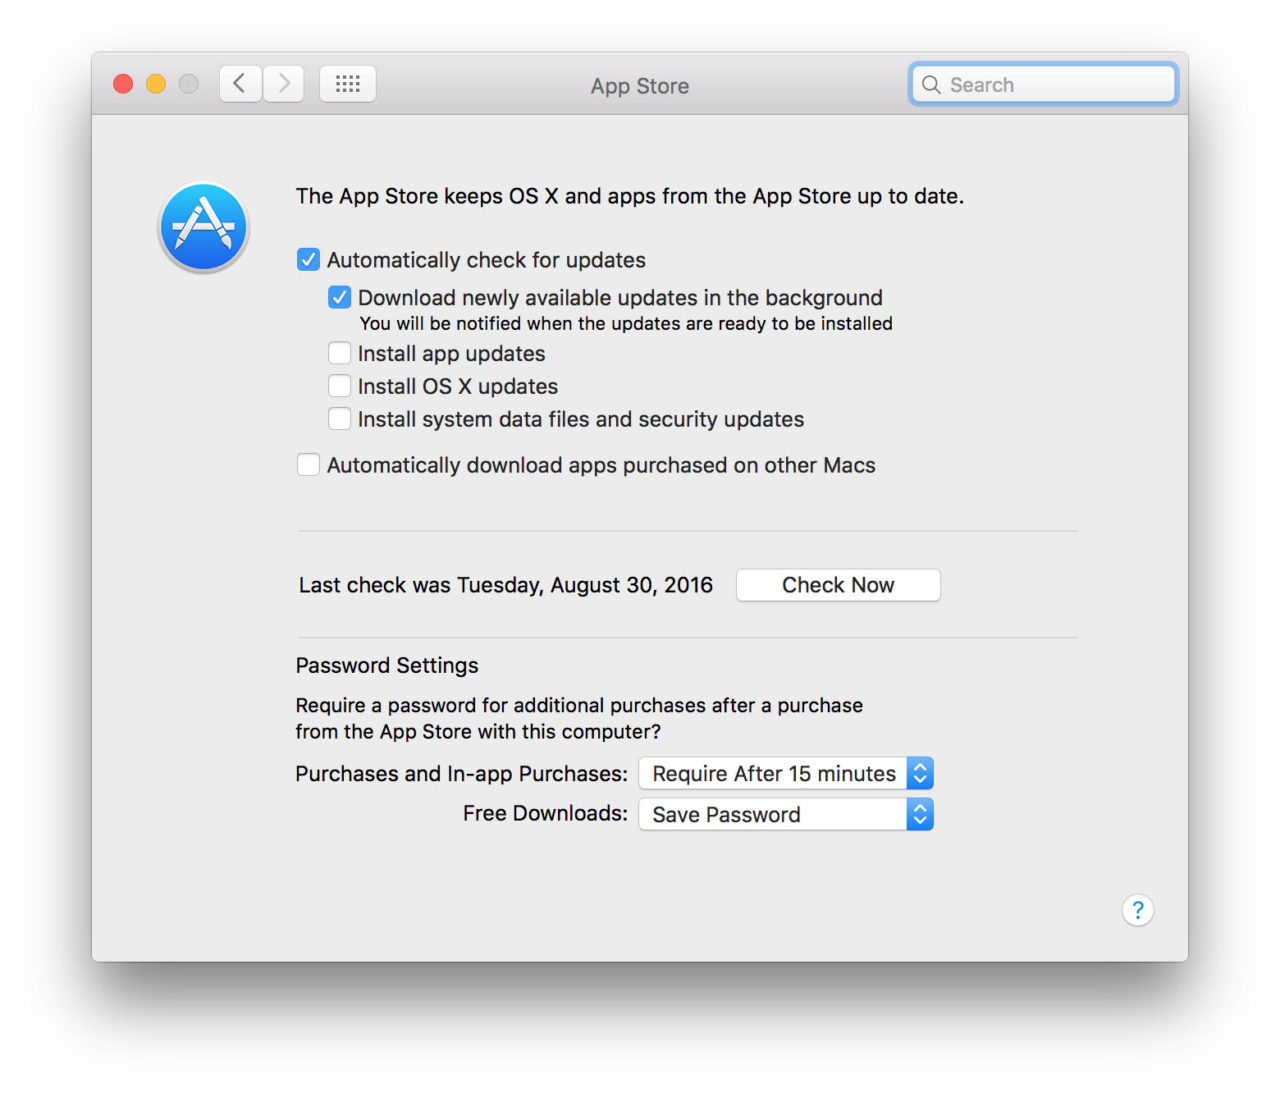 How To Check For Mac Updates